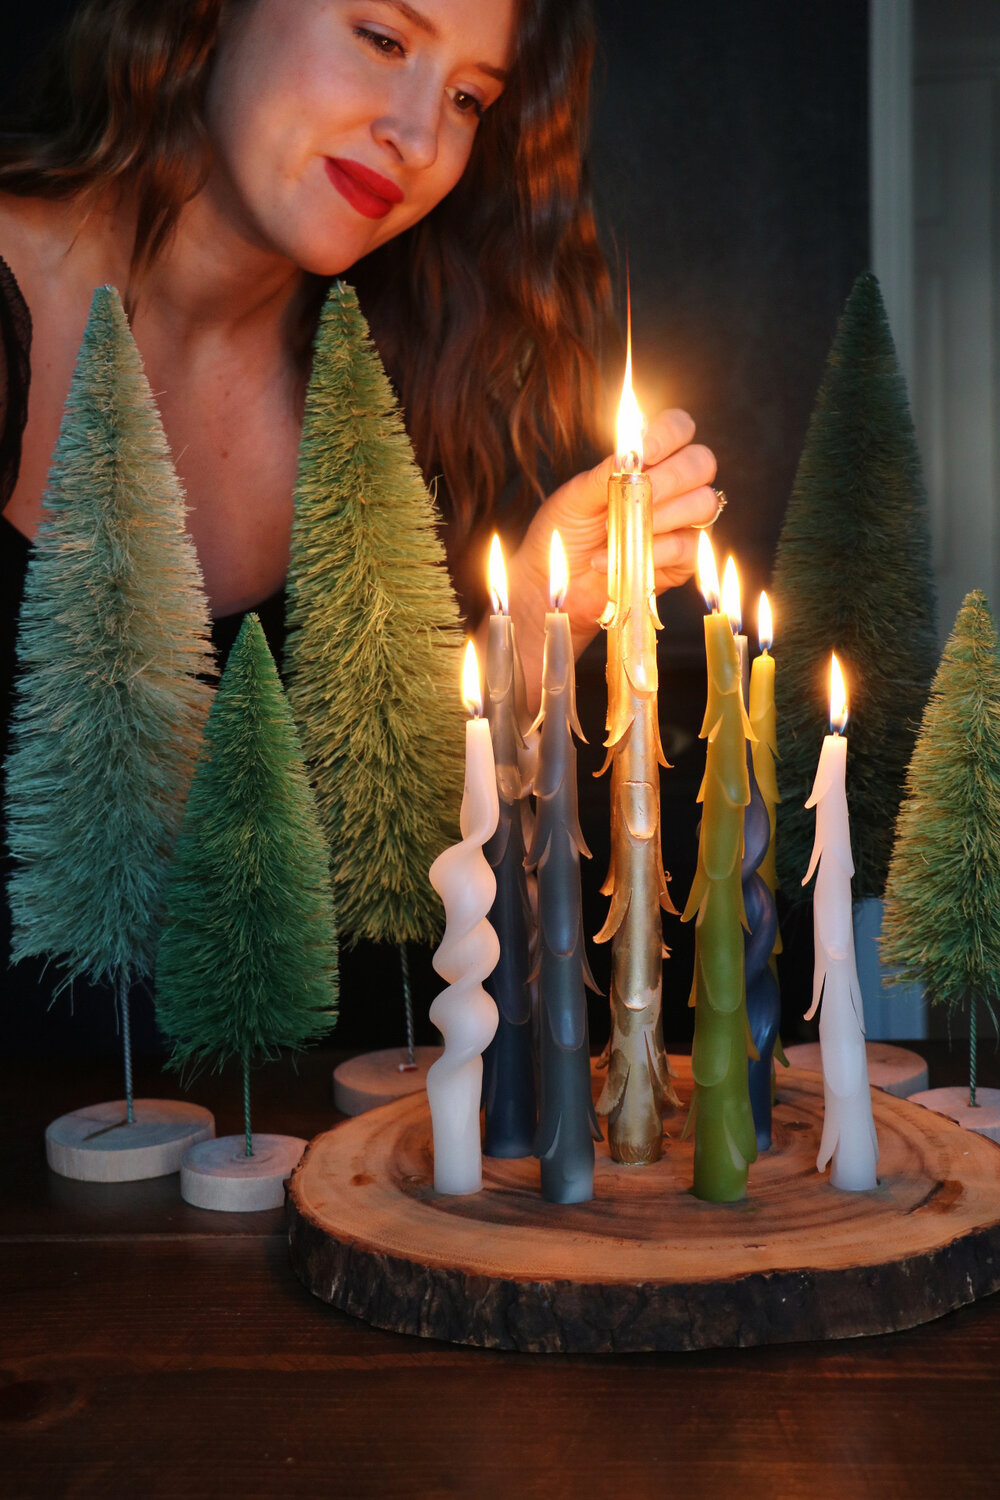 How To Decorate Candles - Do-It-Yourself Fun Ideas